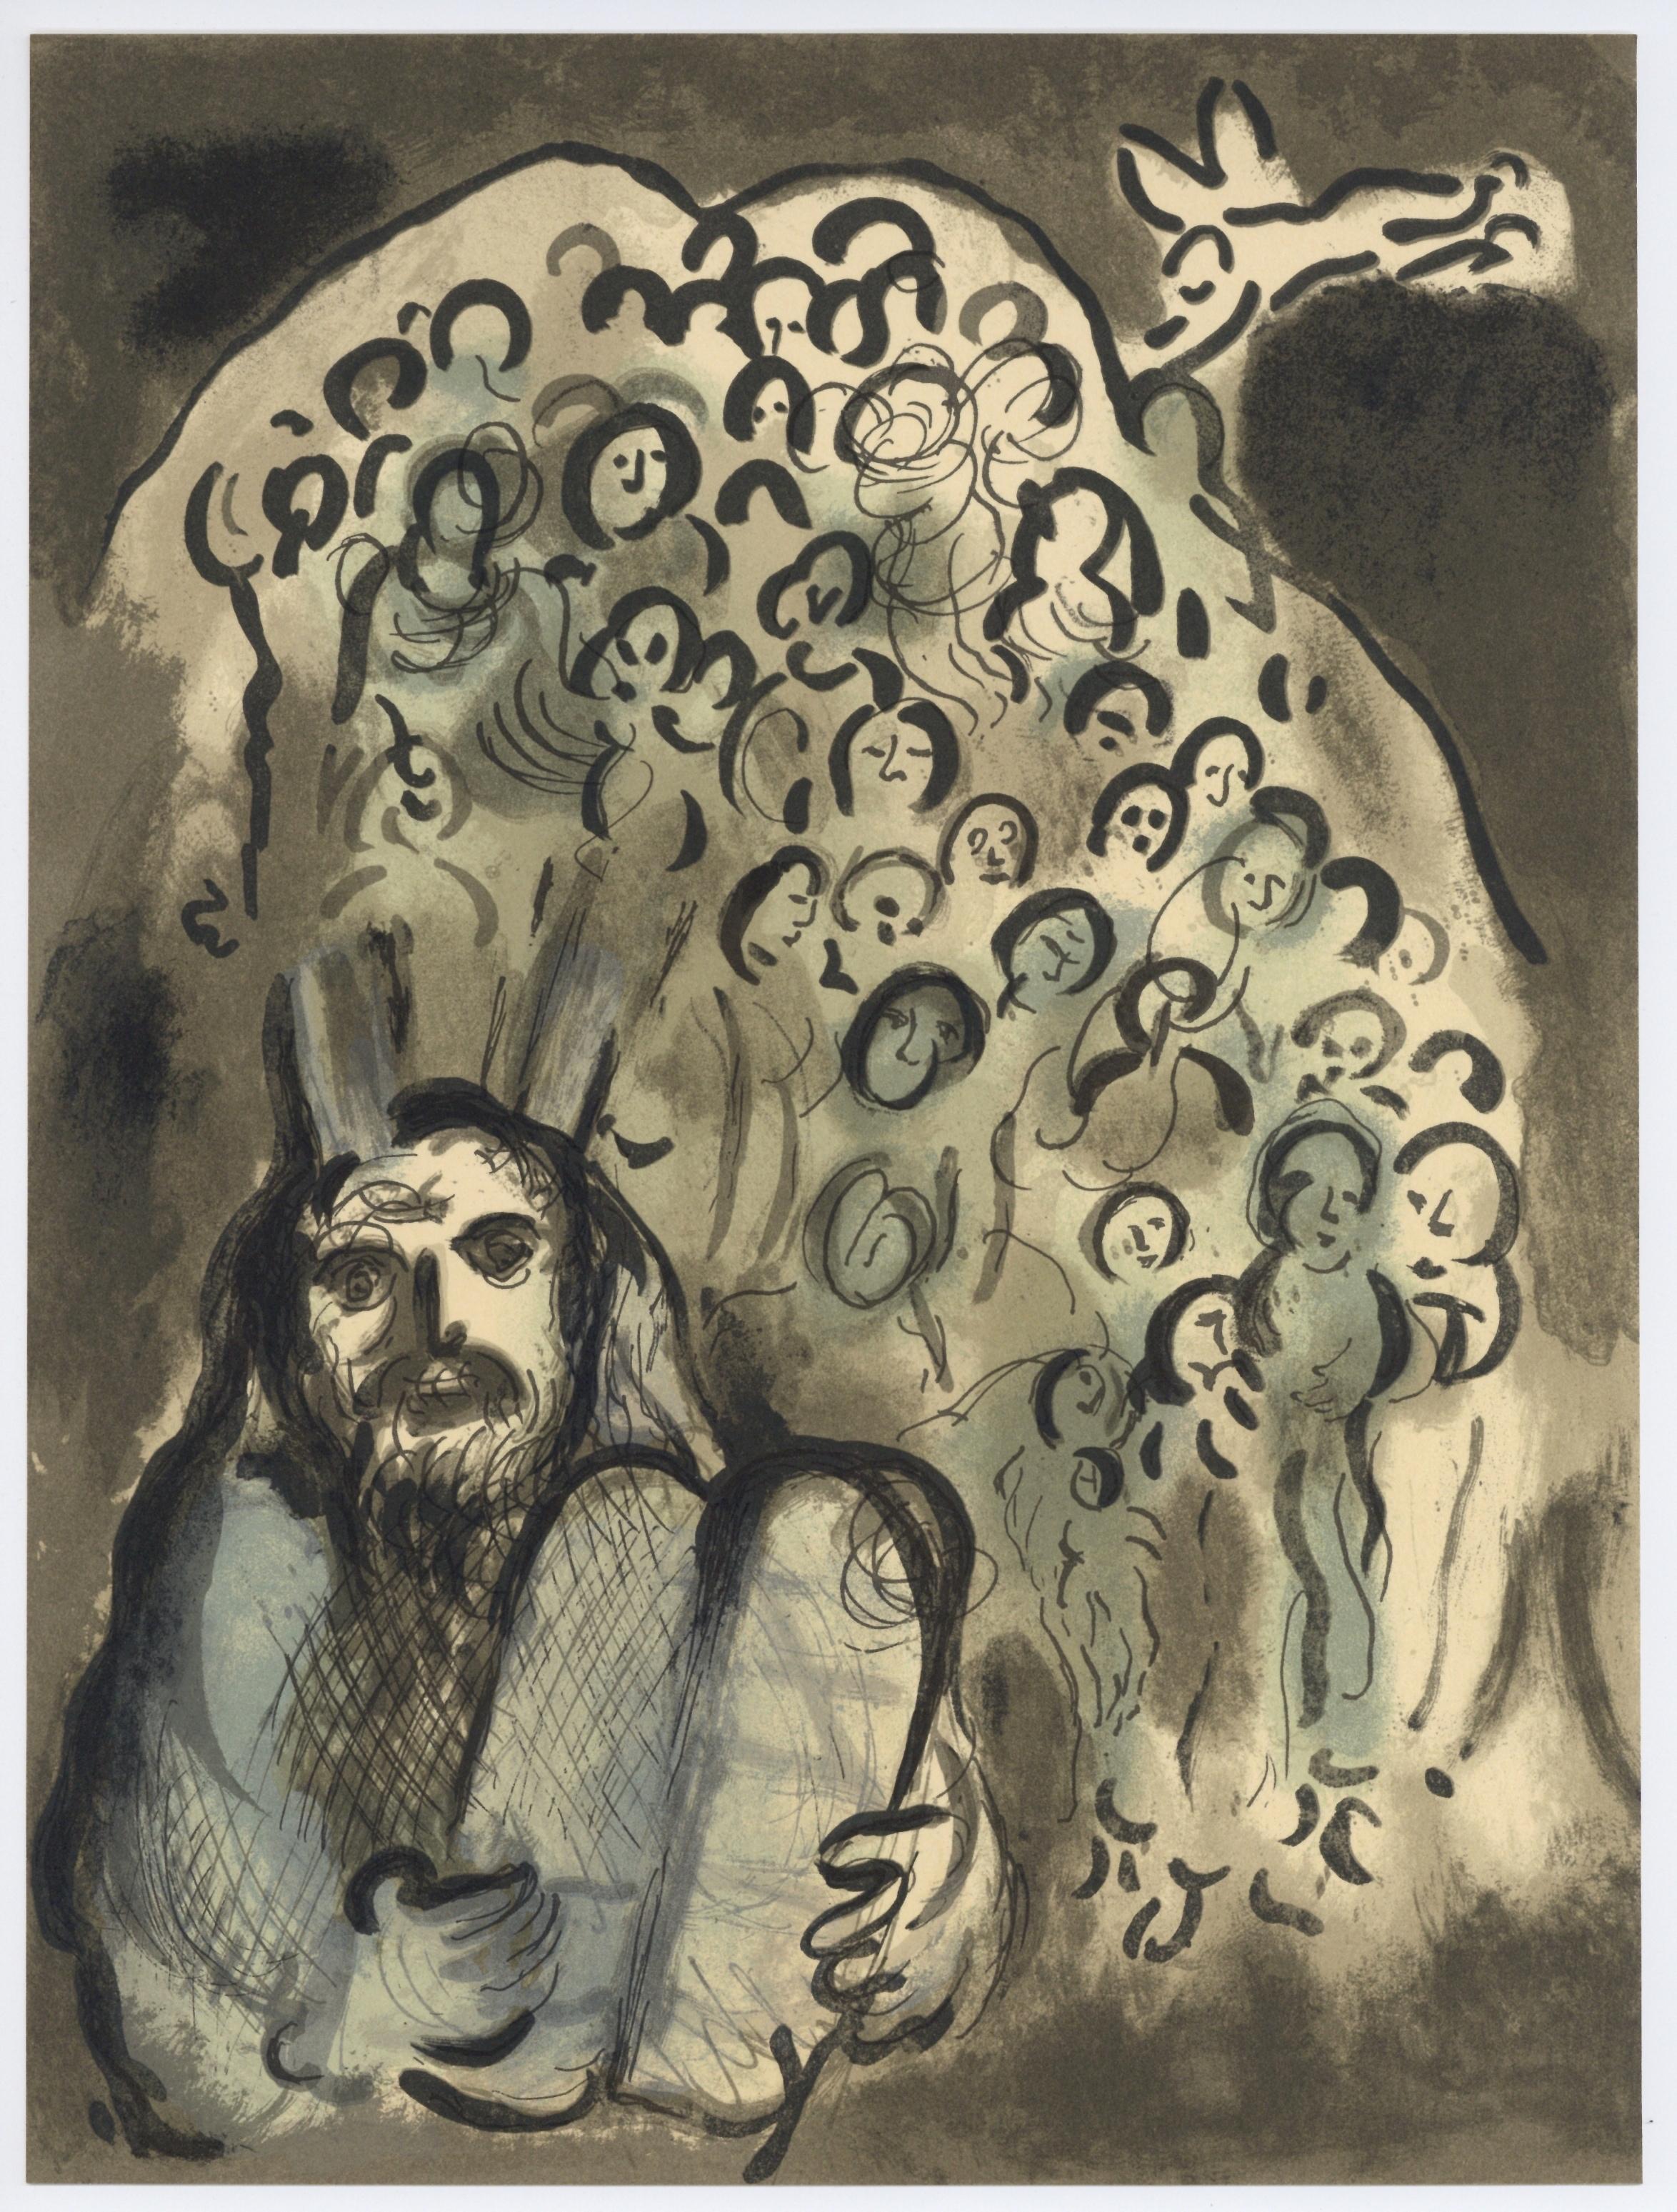 Marc Chagall Portrait Print - "Moses and his People" original lithograph